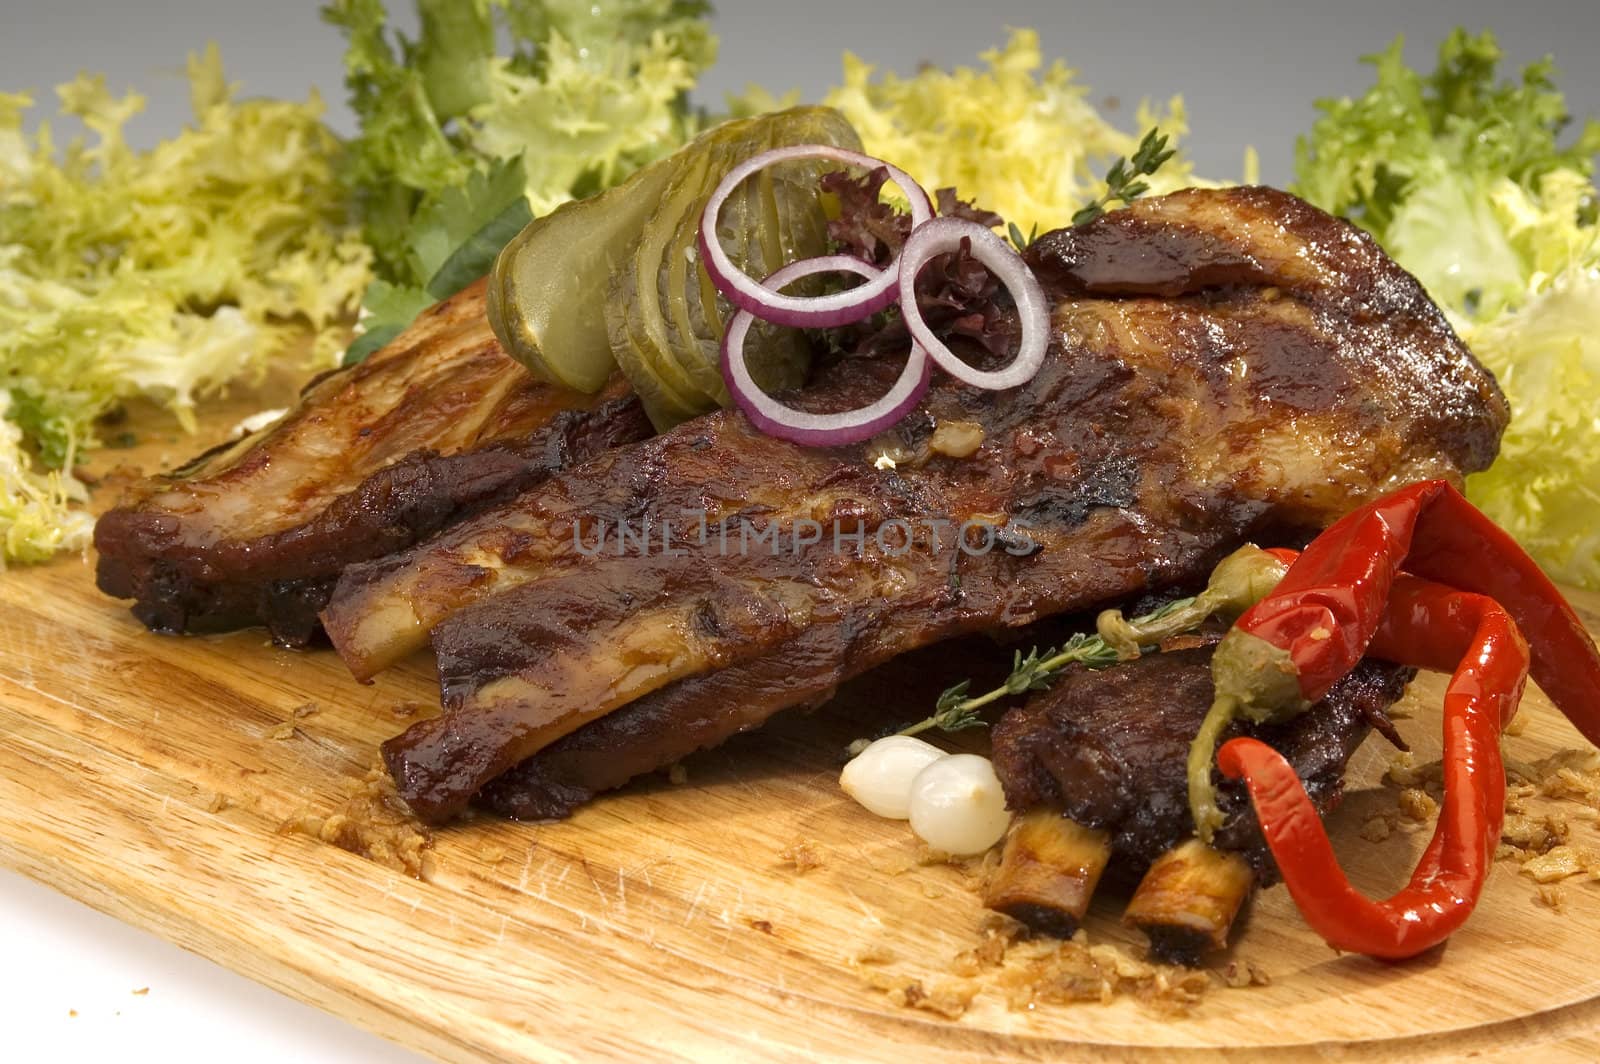 Grilled ribs by hanusst